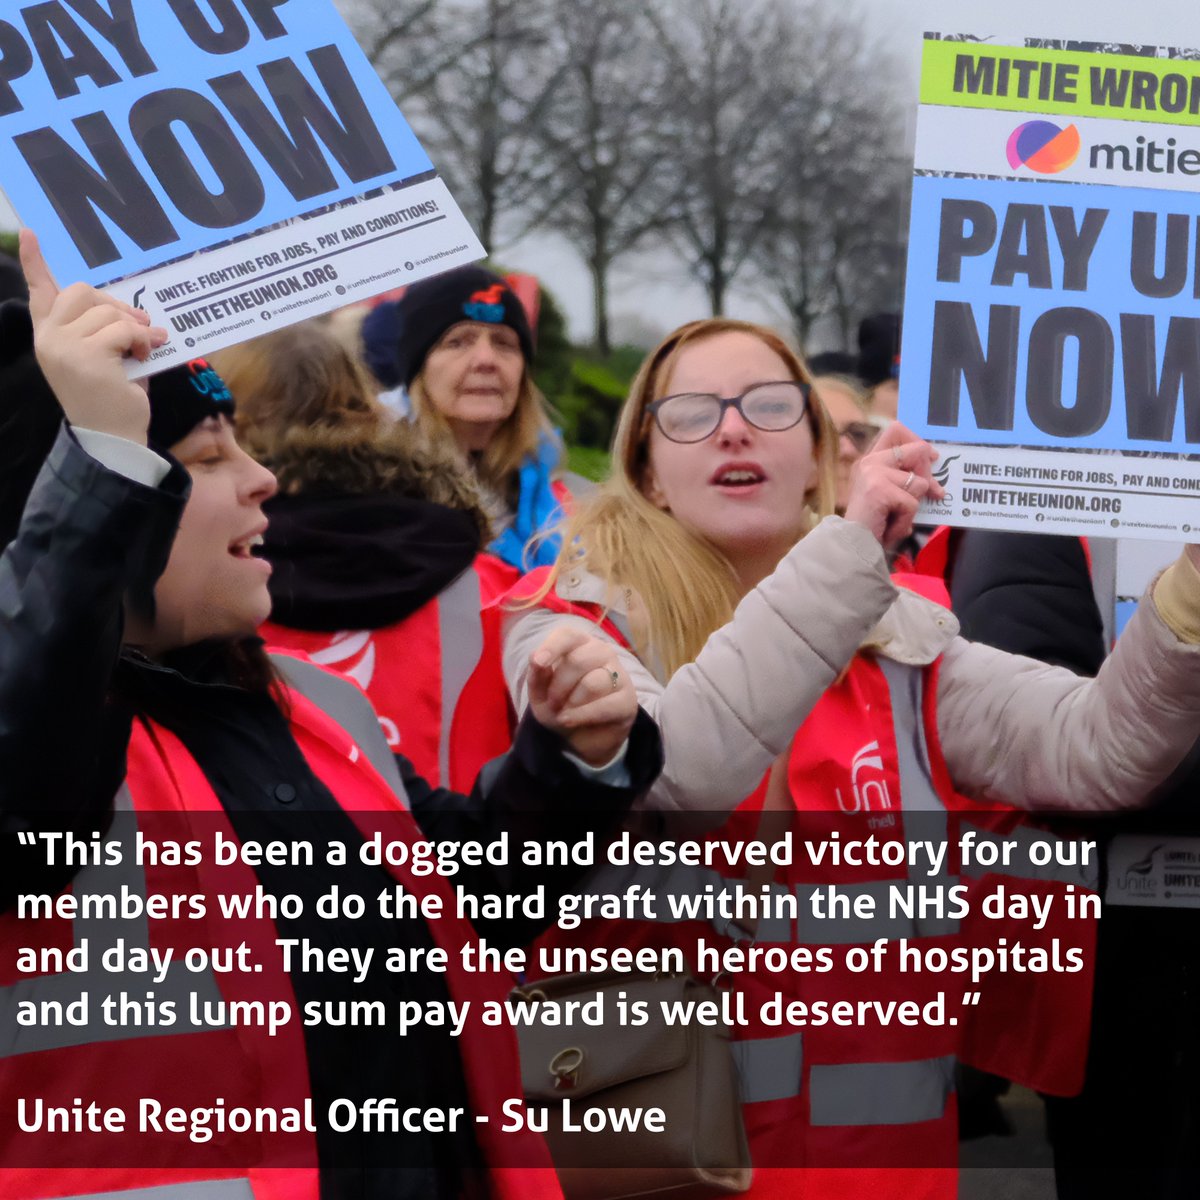 ⭐️ Unite Win ⭐️ Unite led around 70 members through an industrial dispute which included strike action. Following a determined campaign, Mitie has now agreed to back down and pay the lump sum Unite members were owed.